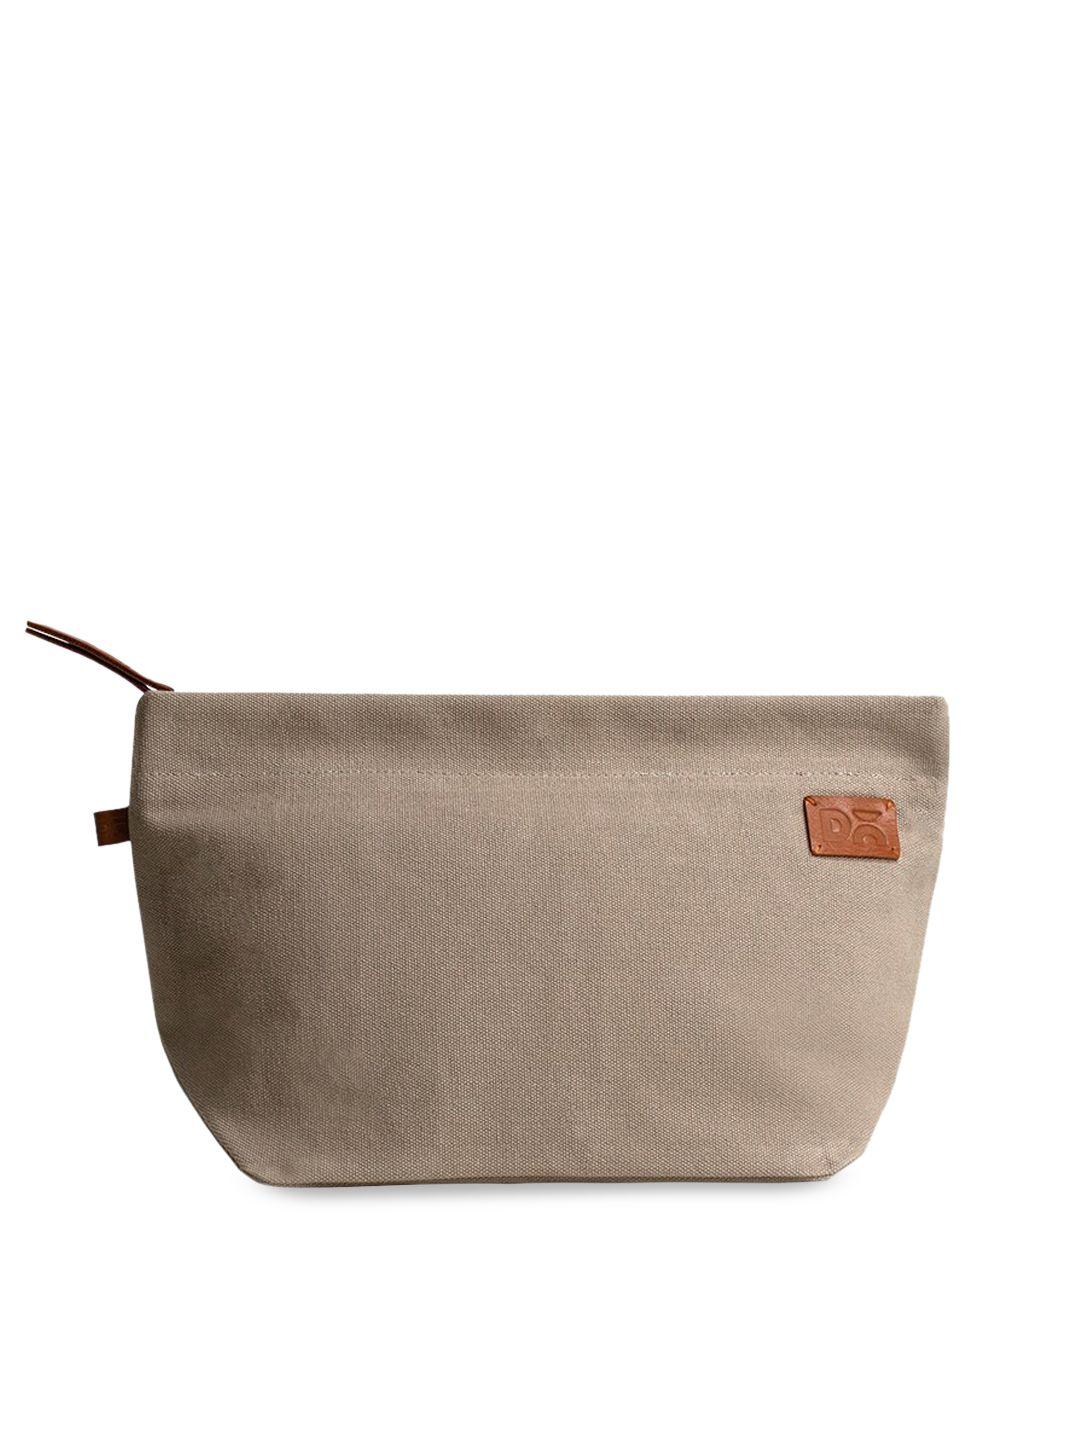 dailyobjects beige solid regular travel pouch